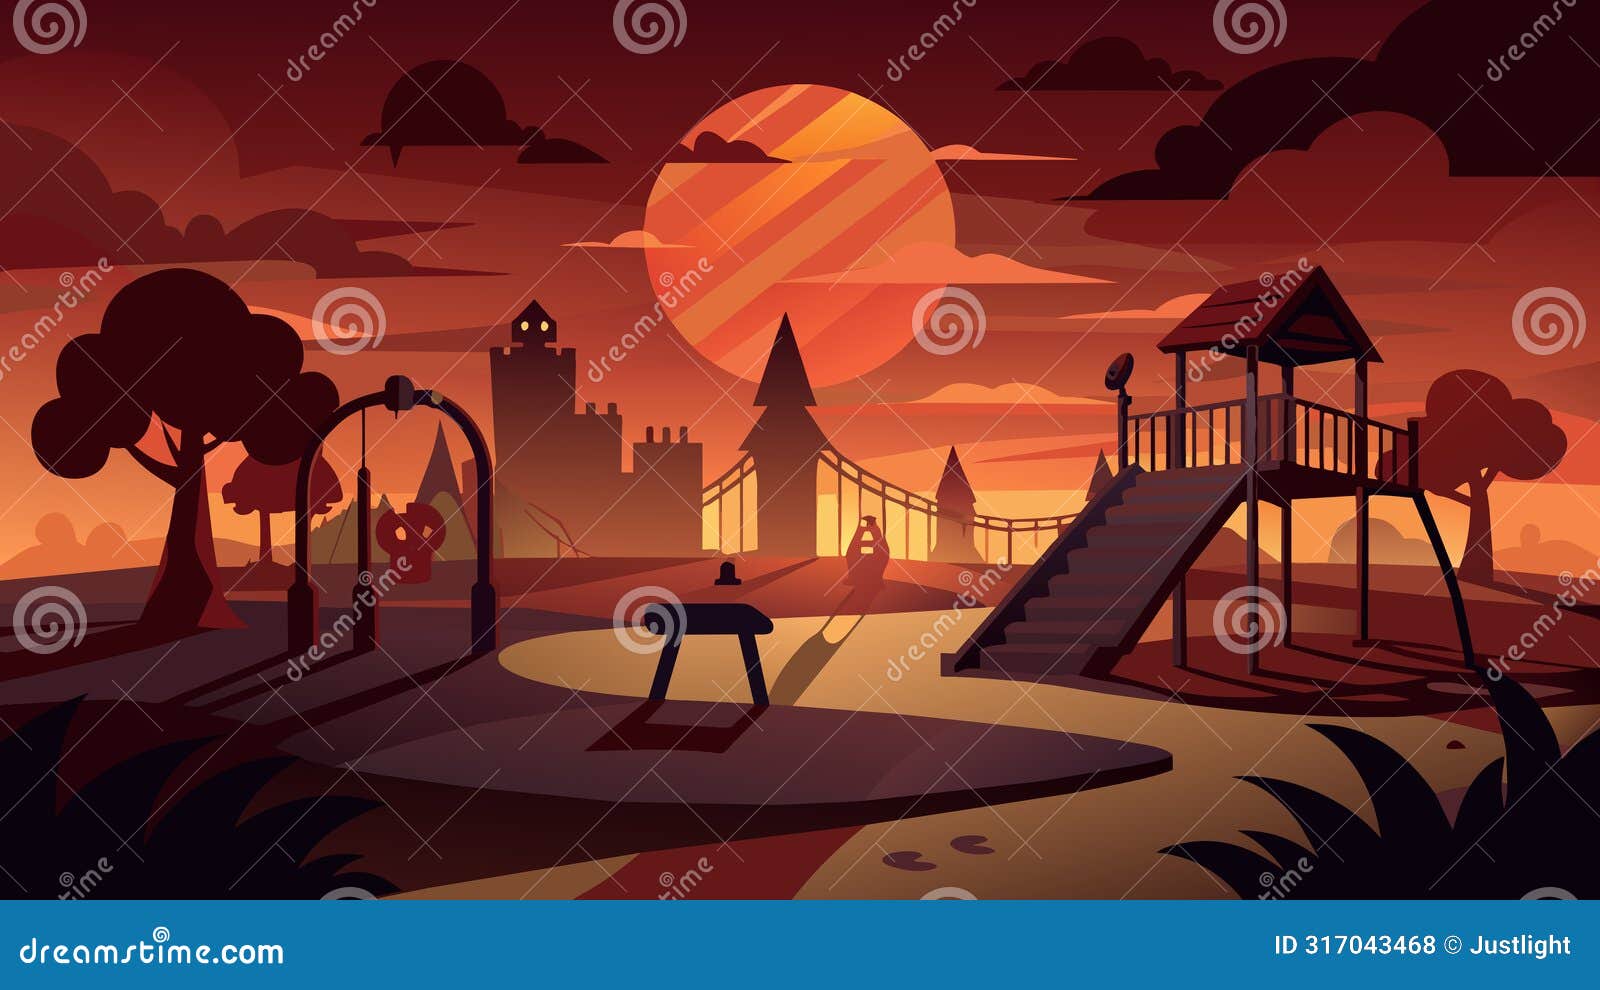 as the sun sets the playground becomes a haunting scene with exaggerated shadows lengthening and intertwining creating a